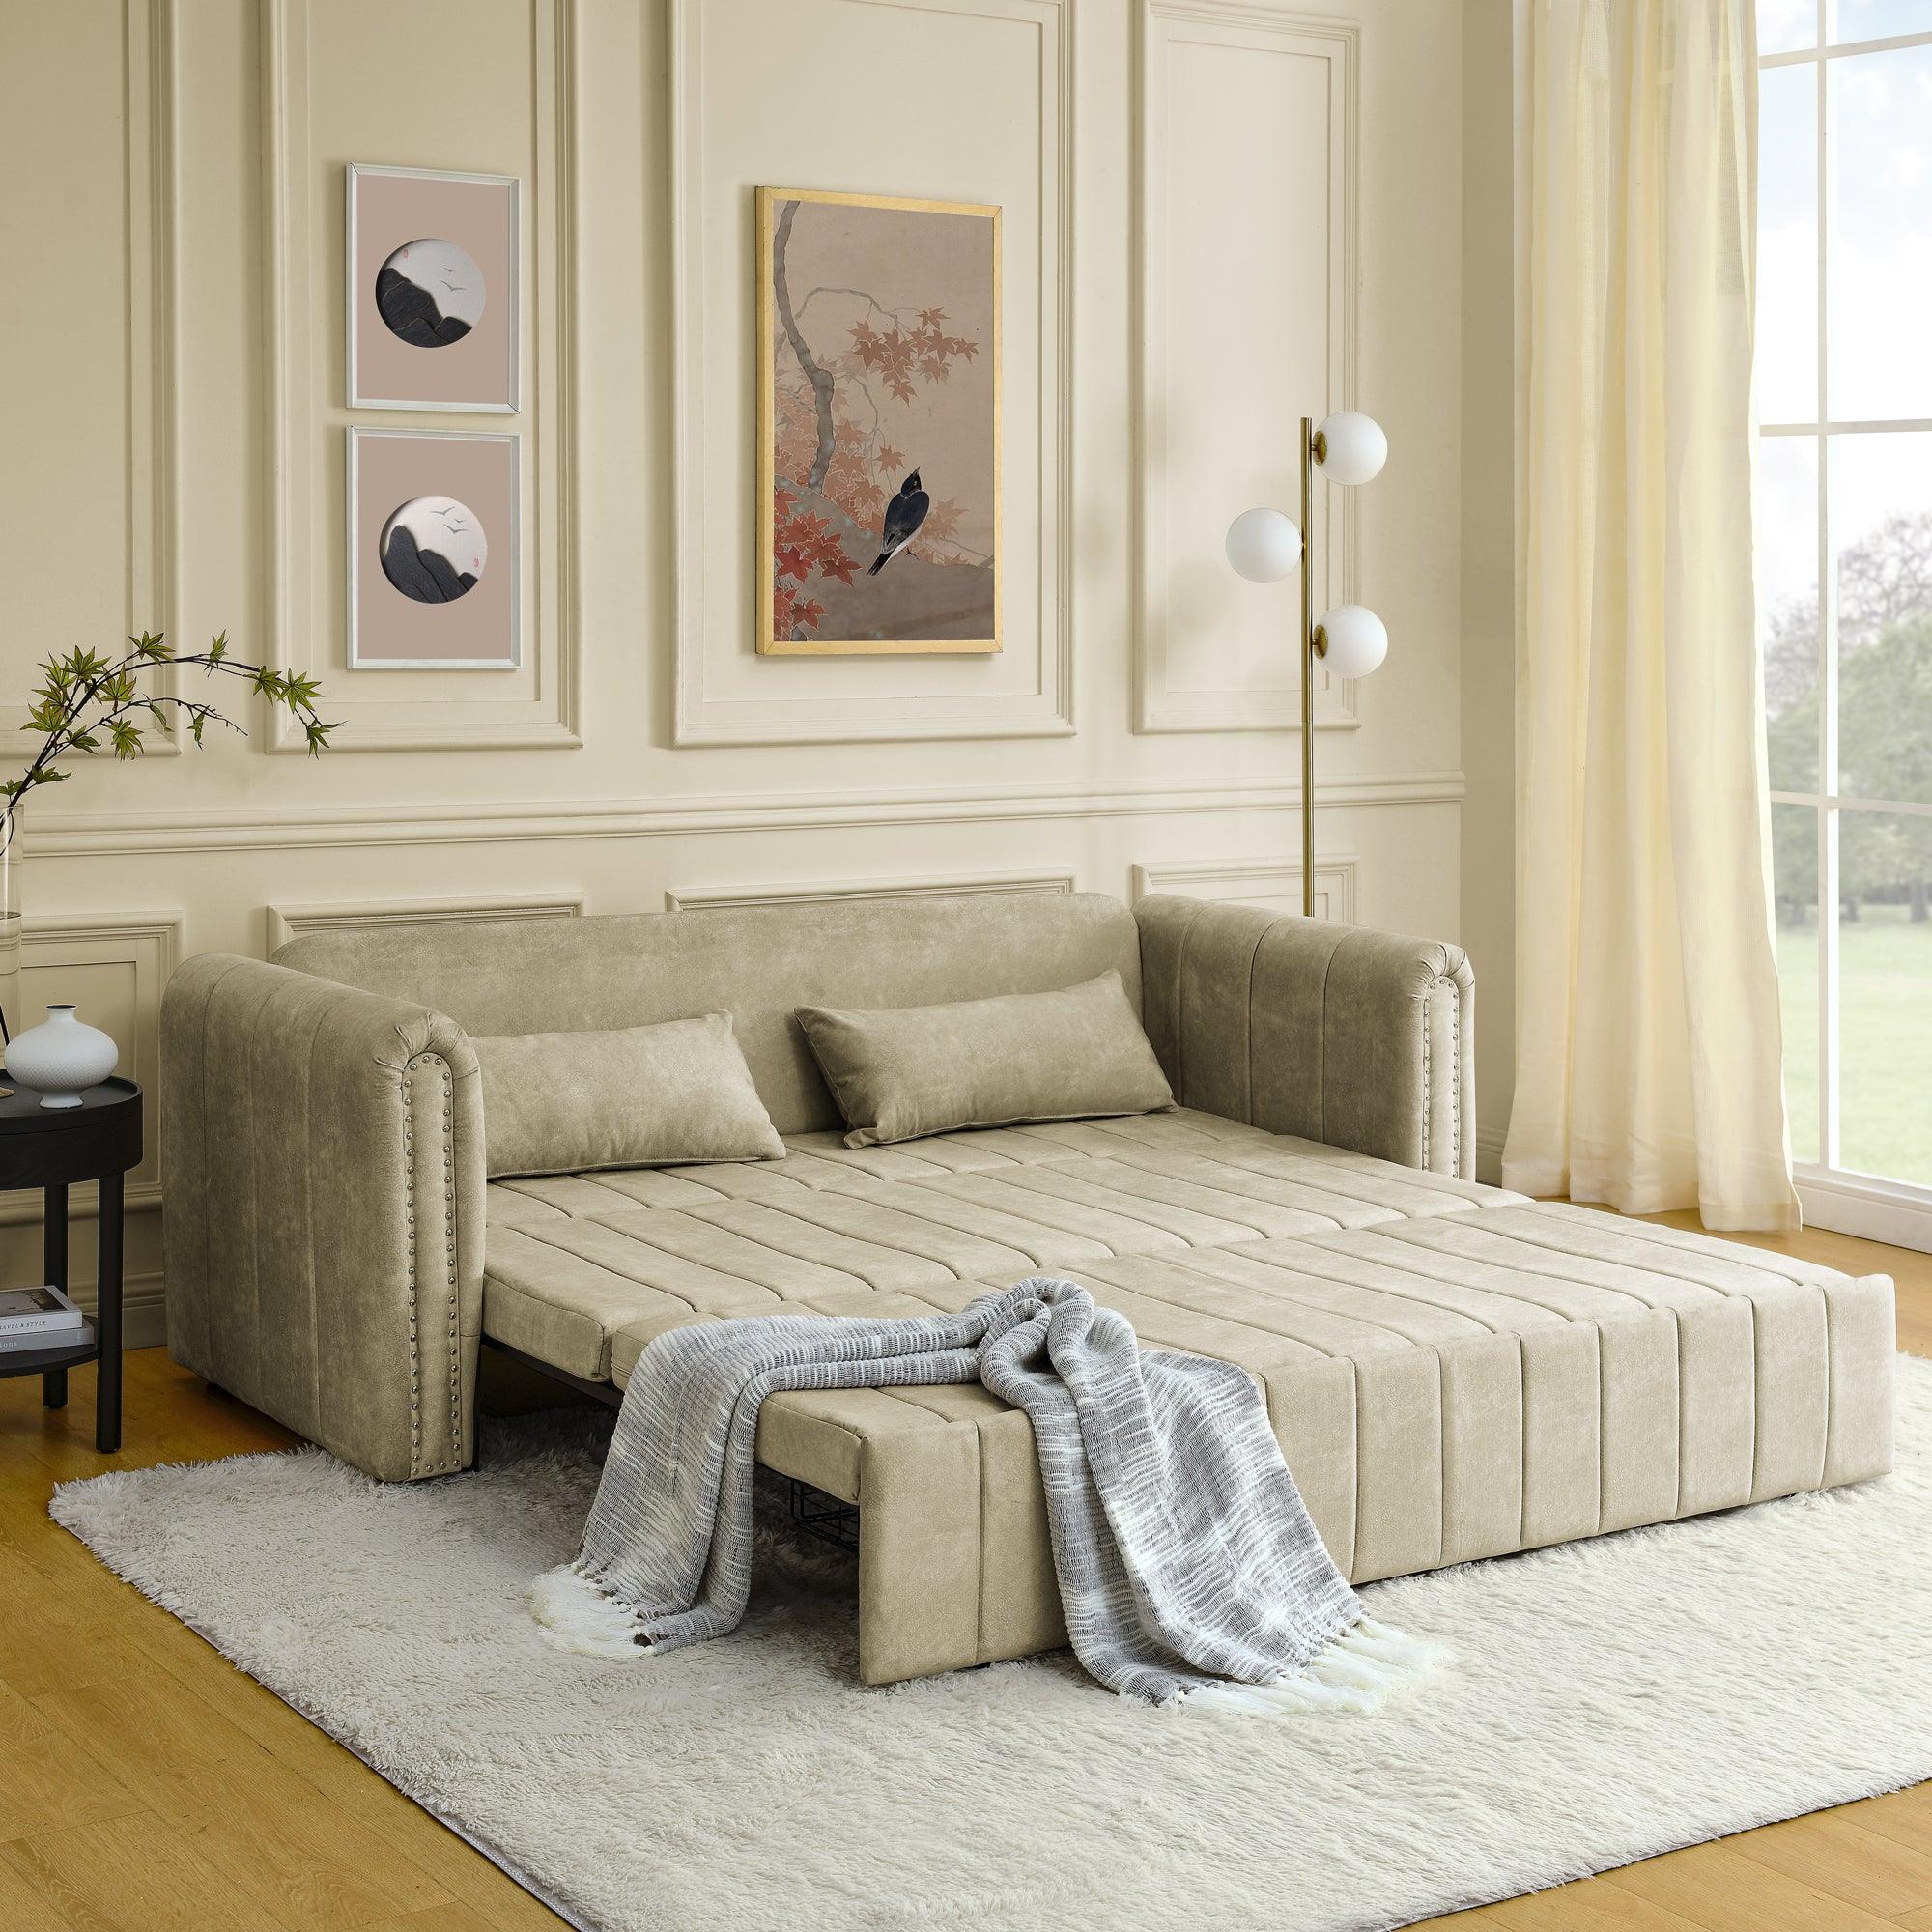 🆓🚛 3 in 1 Pull-Out Bed Sleeper Sofa, Rolled Arms, Copper Nails, 2 Drawers, 2 Pillows, Beige